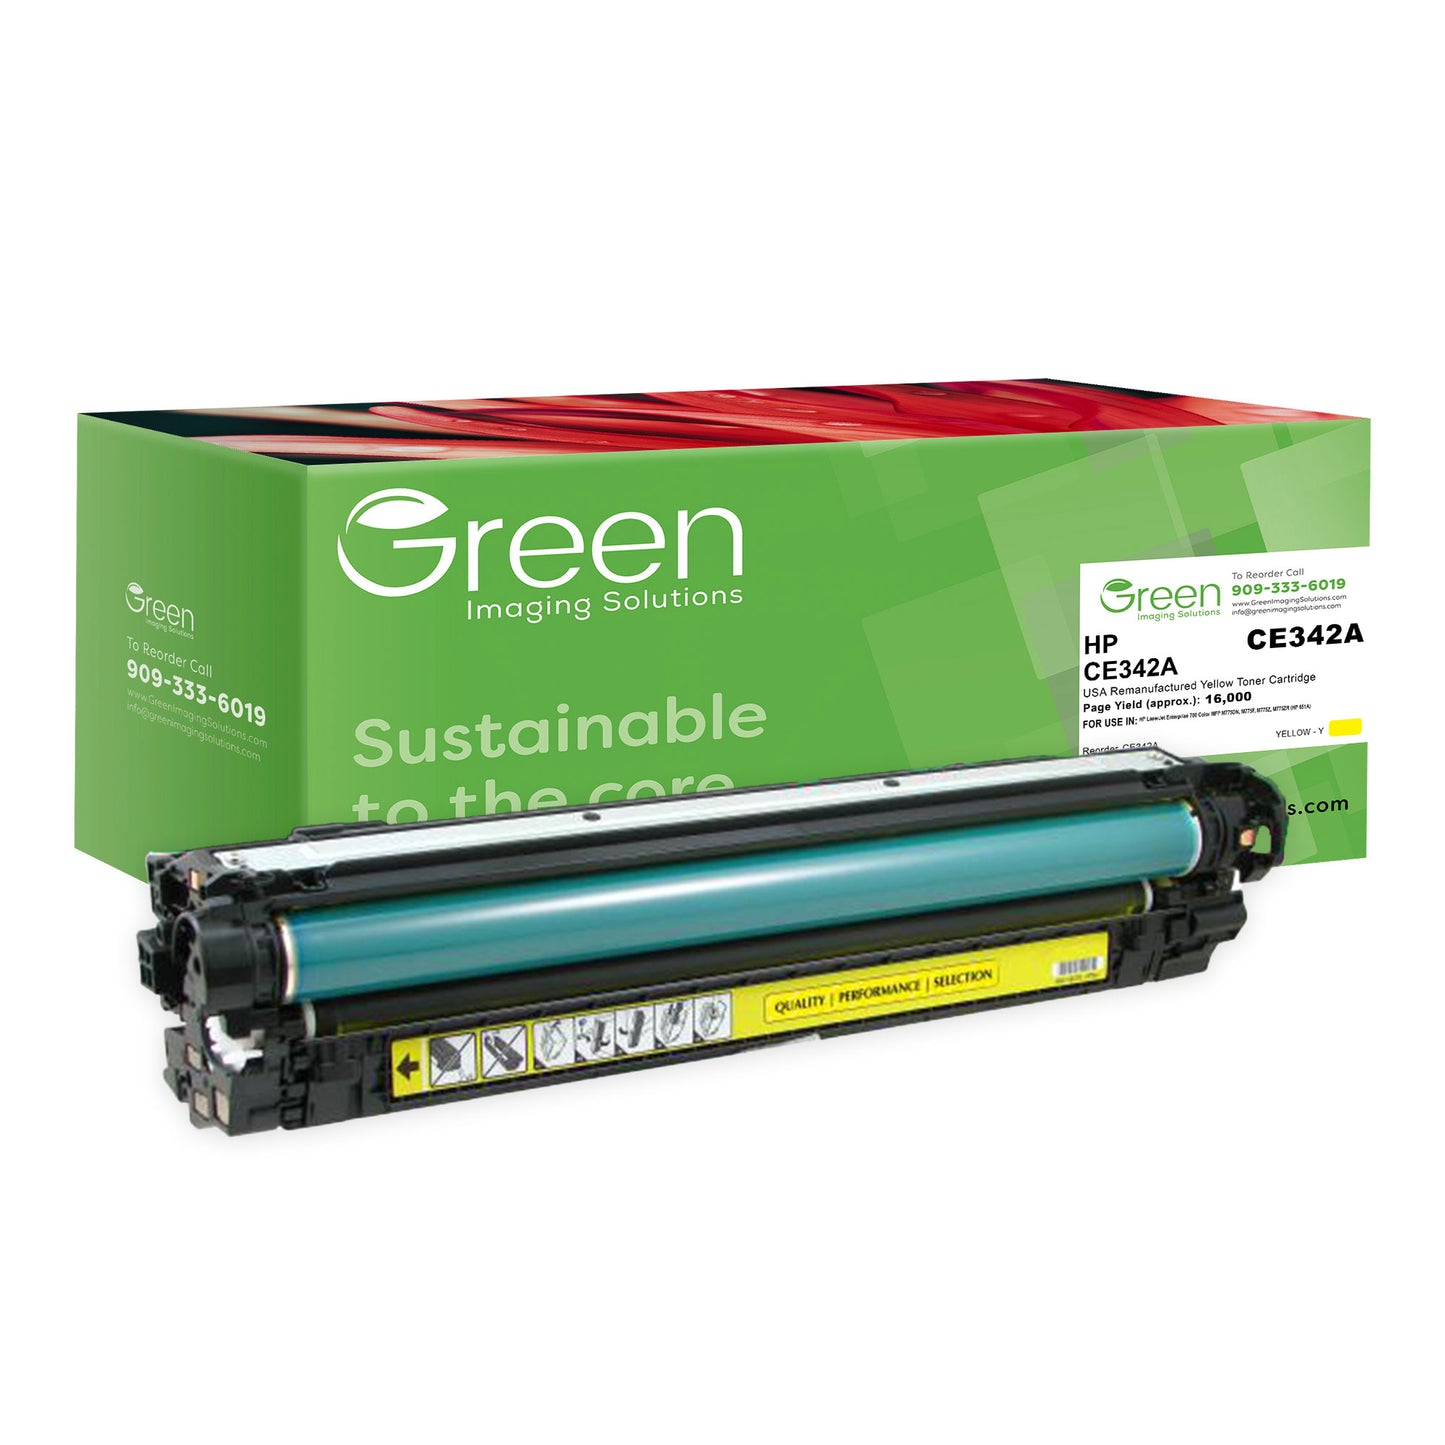 GIS USA Remanufactured Yellow Toner Cartridge for HP CE342A (HP 651A)